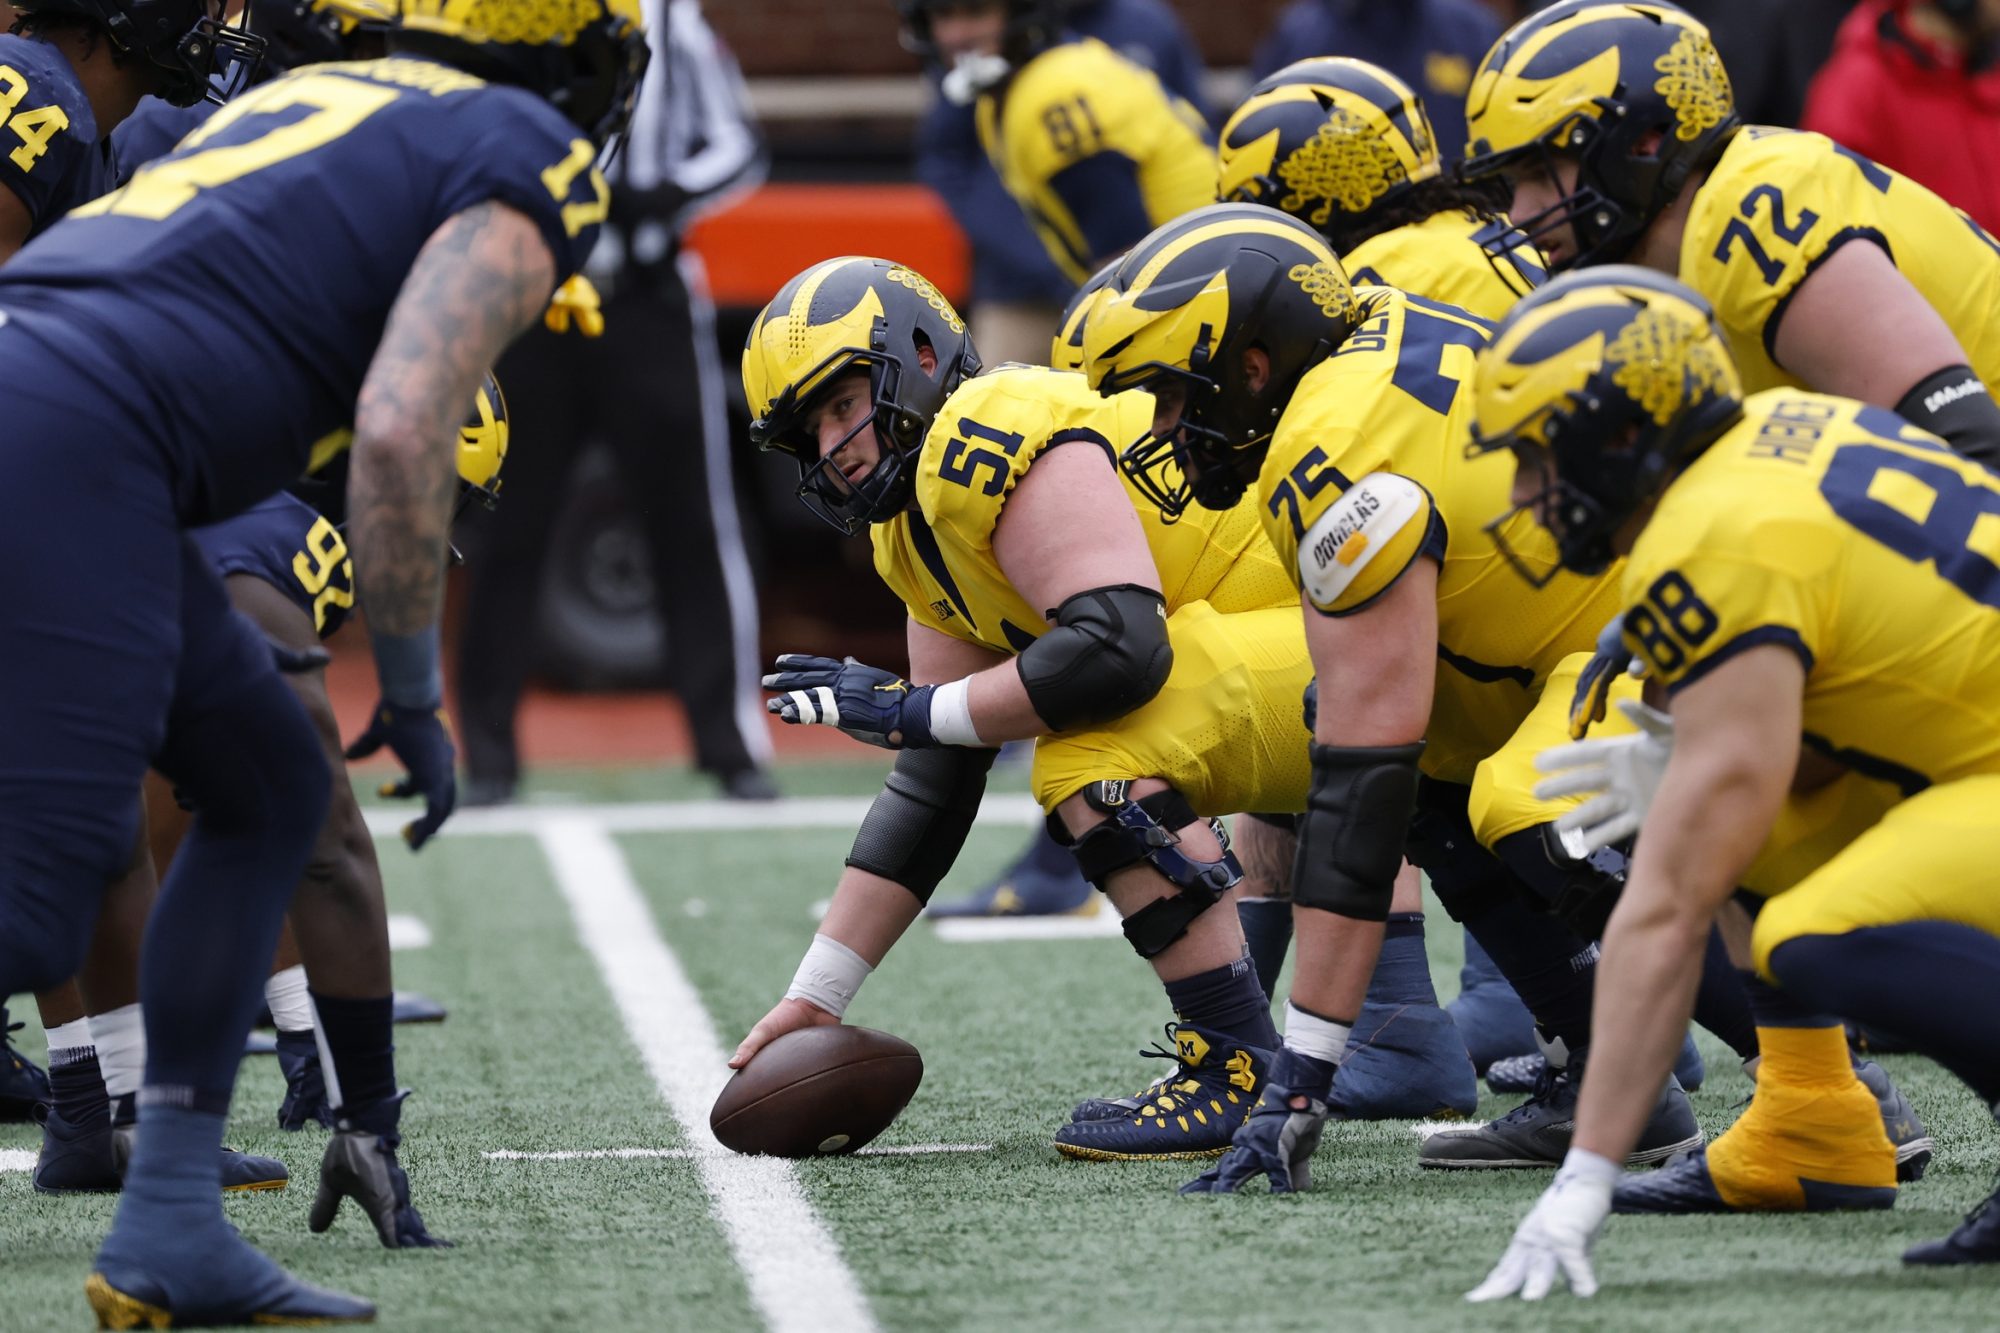 Michigan football players will ride Peloton's bikes on the sideline during games.